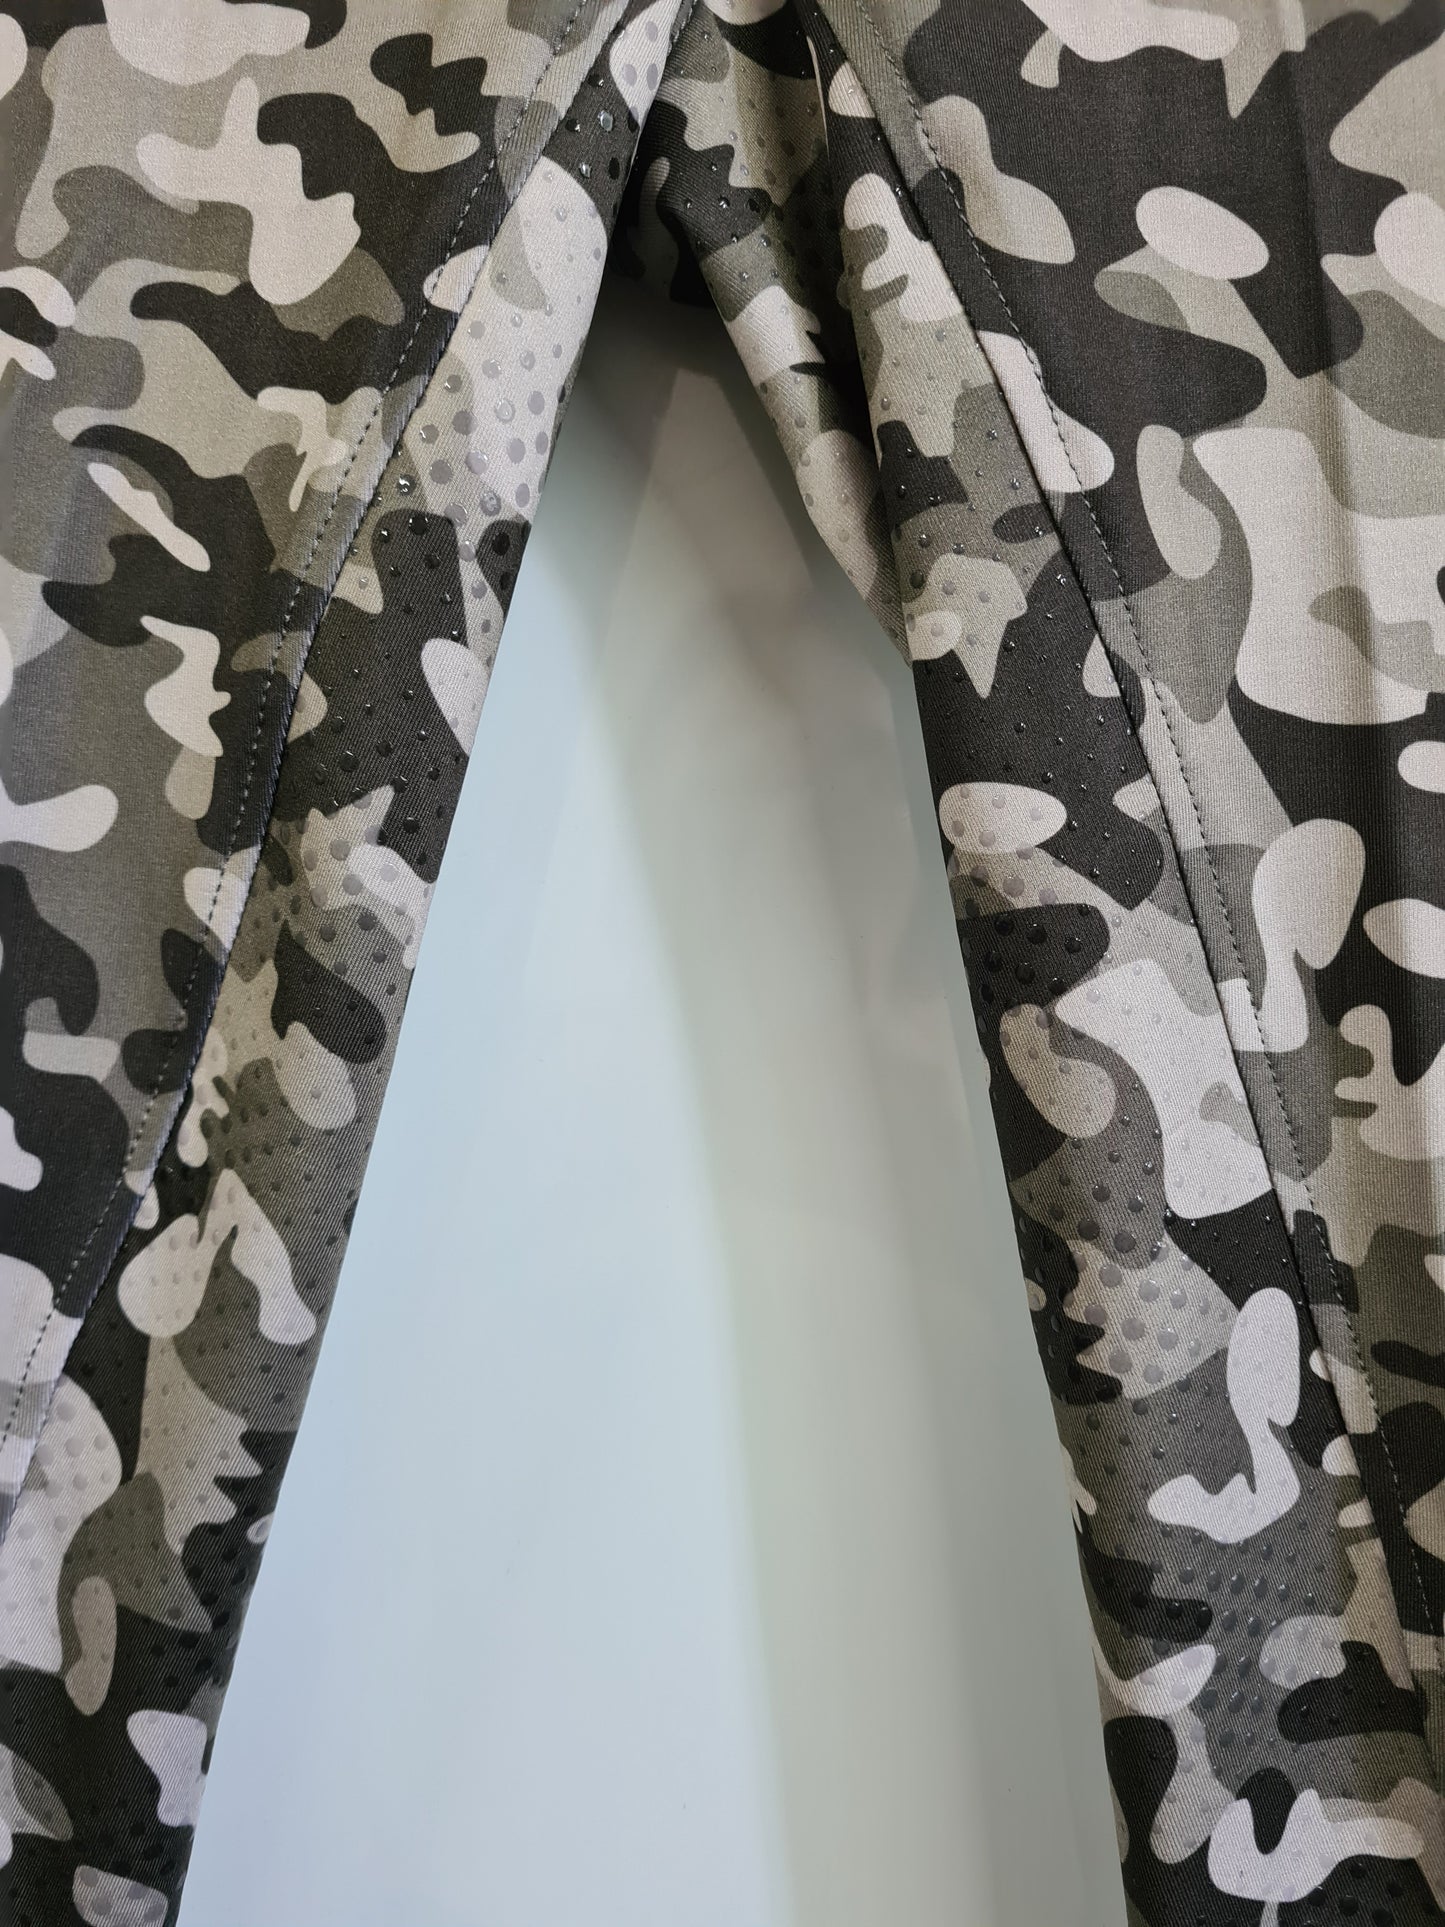 💥NEW💥 Rhinegold Performance  Camo Grey Riding Tights size 14 FREE POSTAGE ✅️